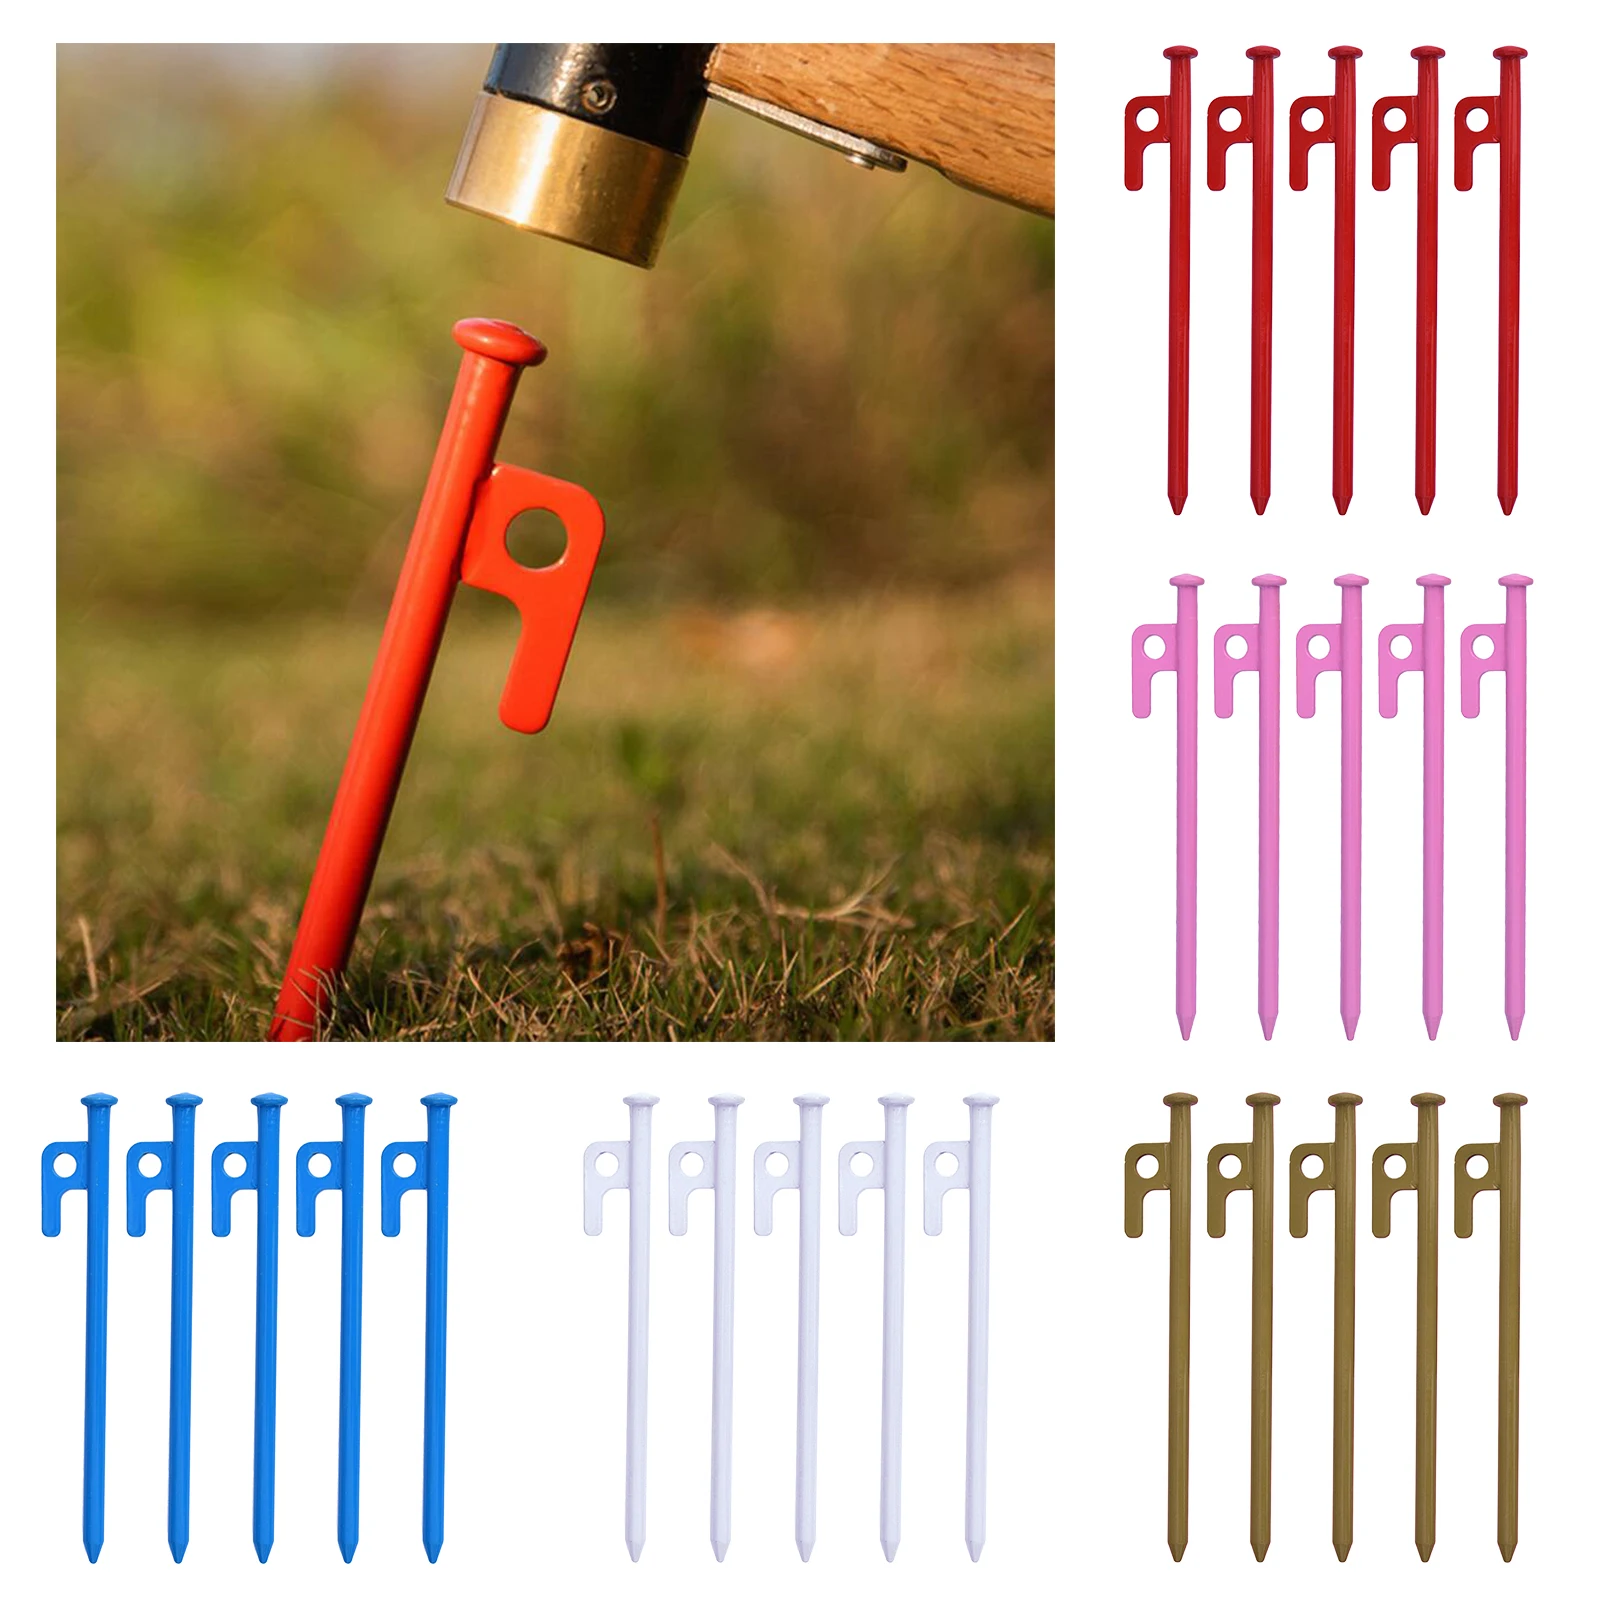 5pcs Tent Nails Stakes Camping Pegs Steel Tent Pegs Beach Garden Accessories